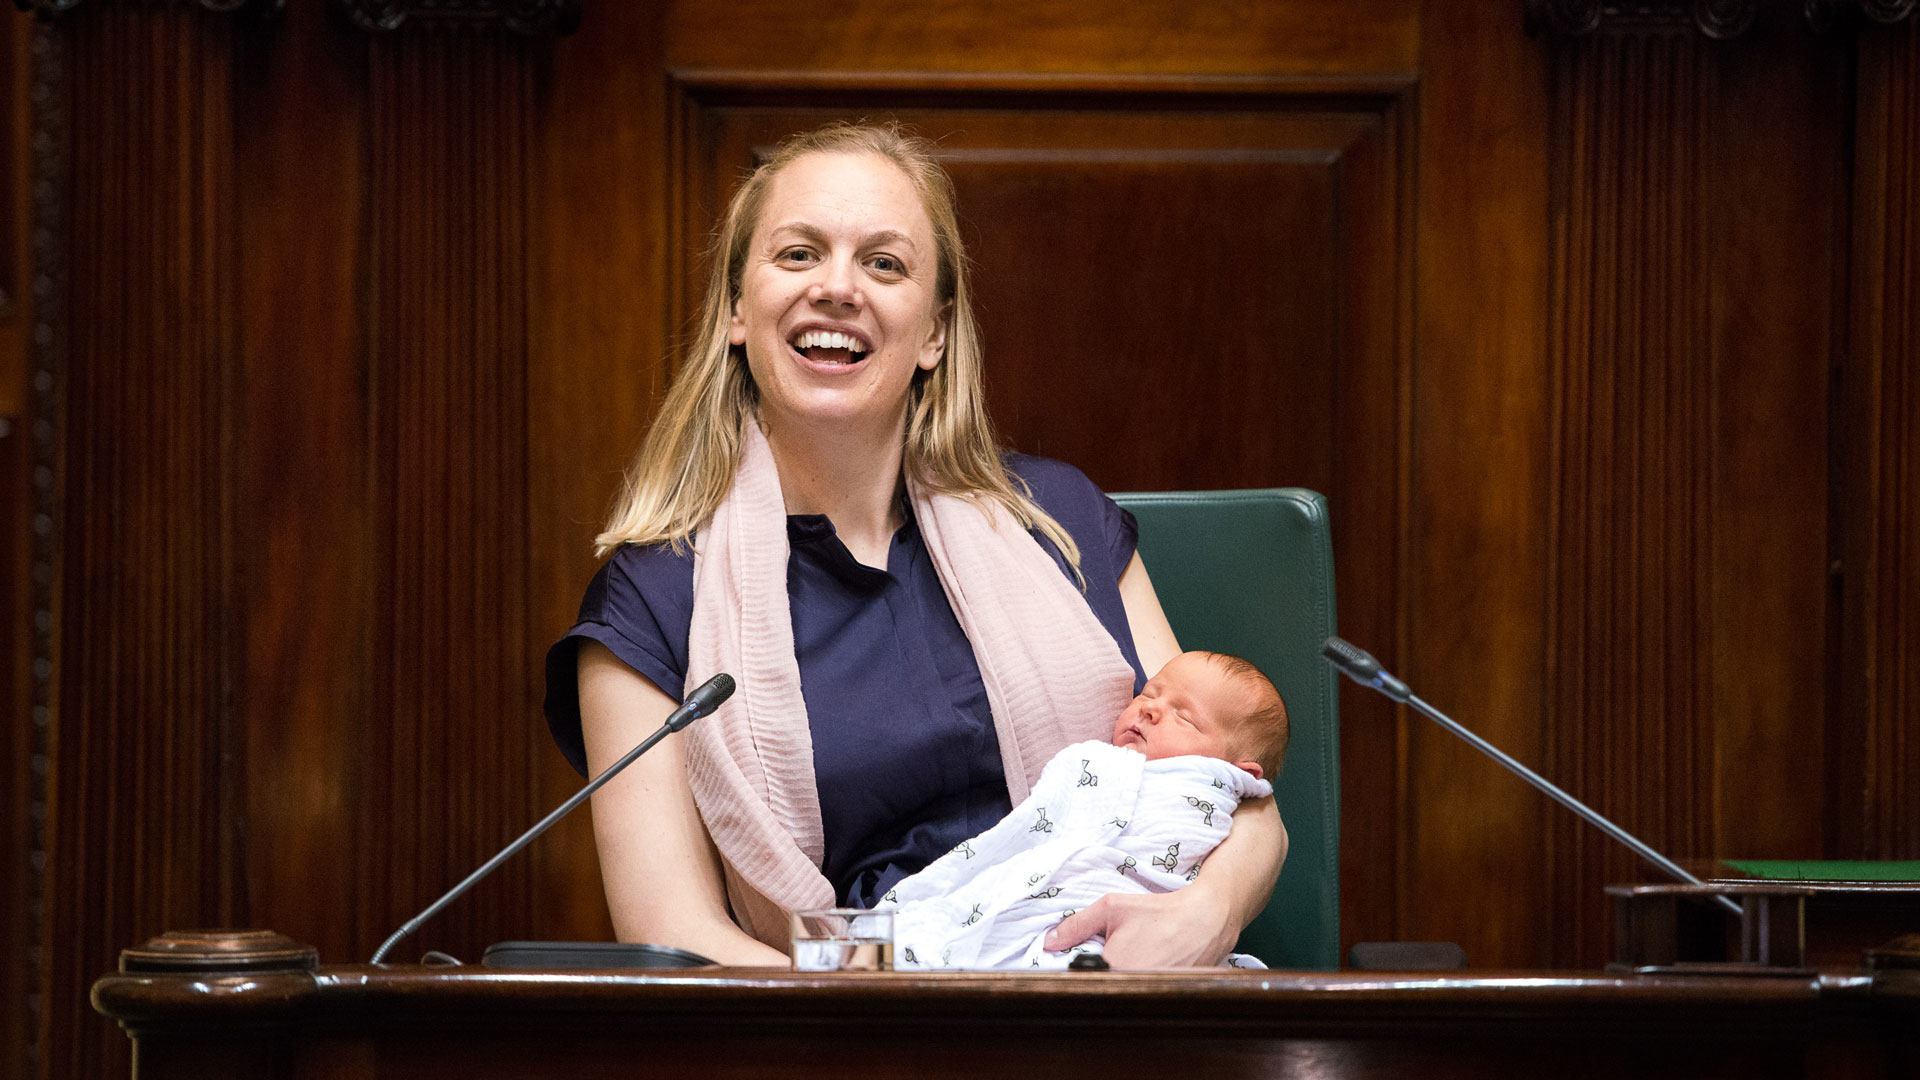 Photo of a woman holding a baby in parliament